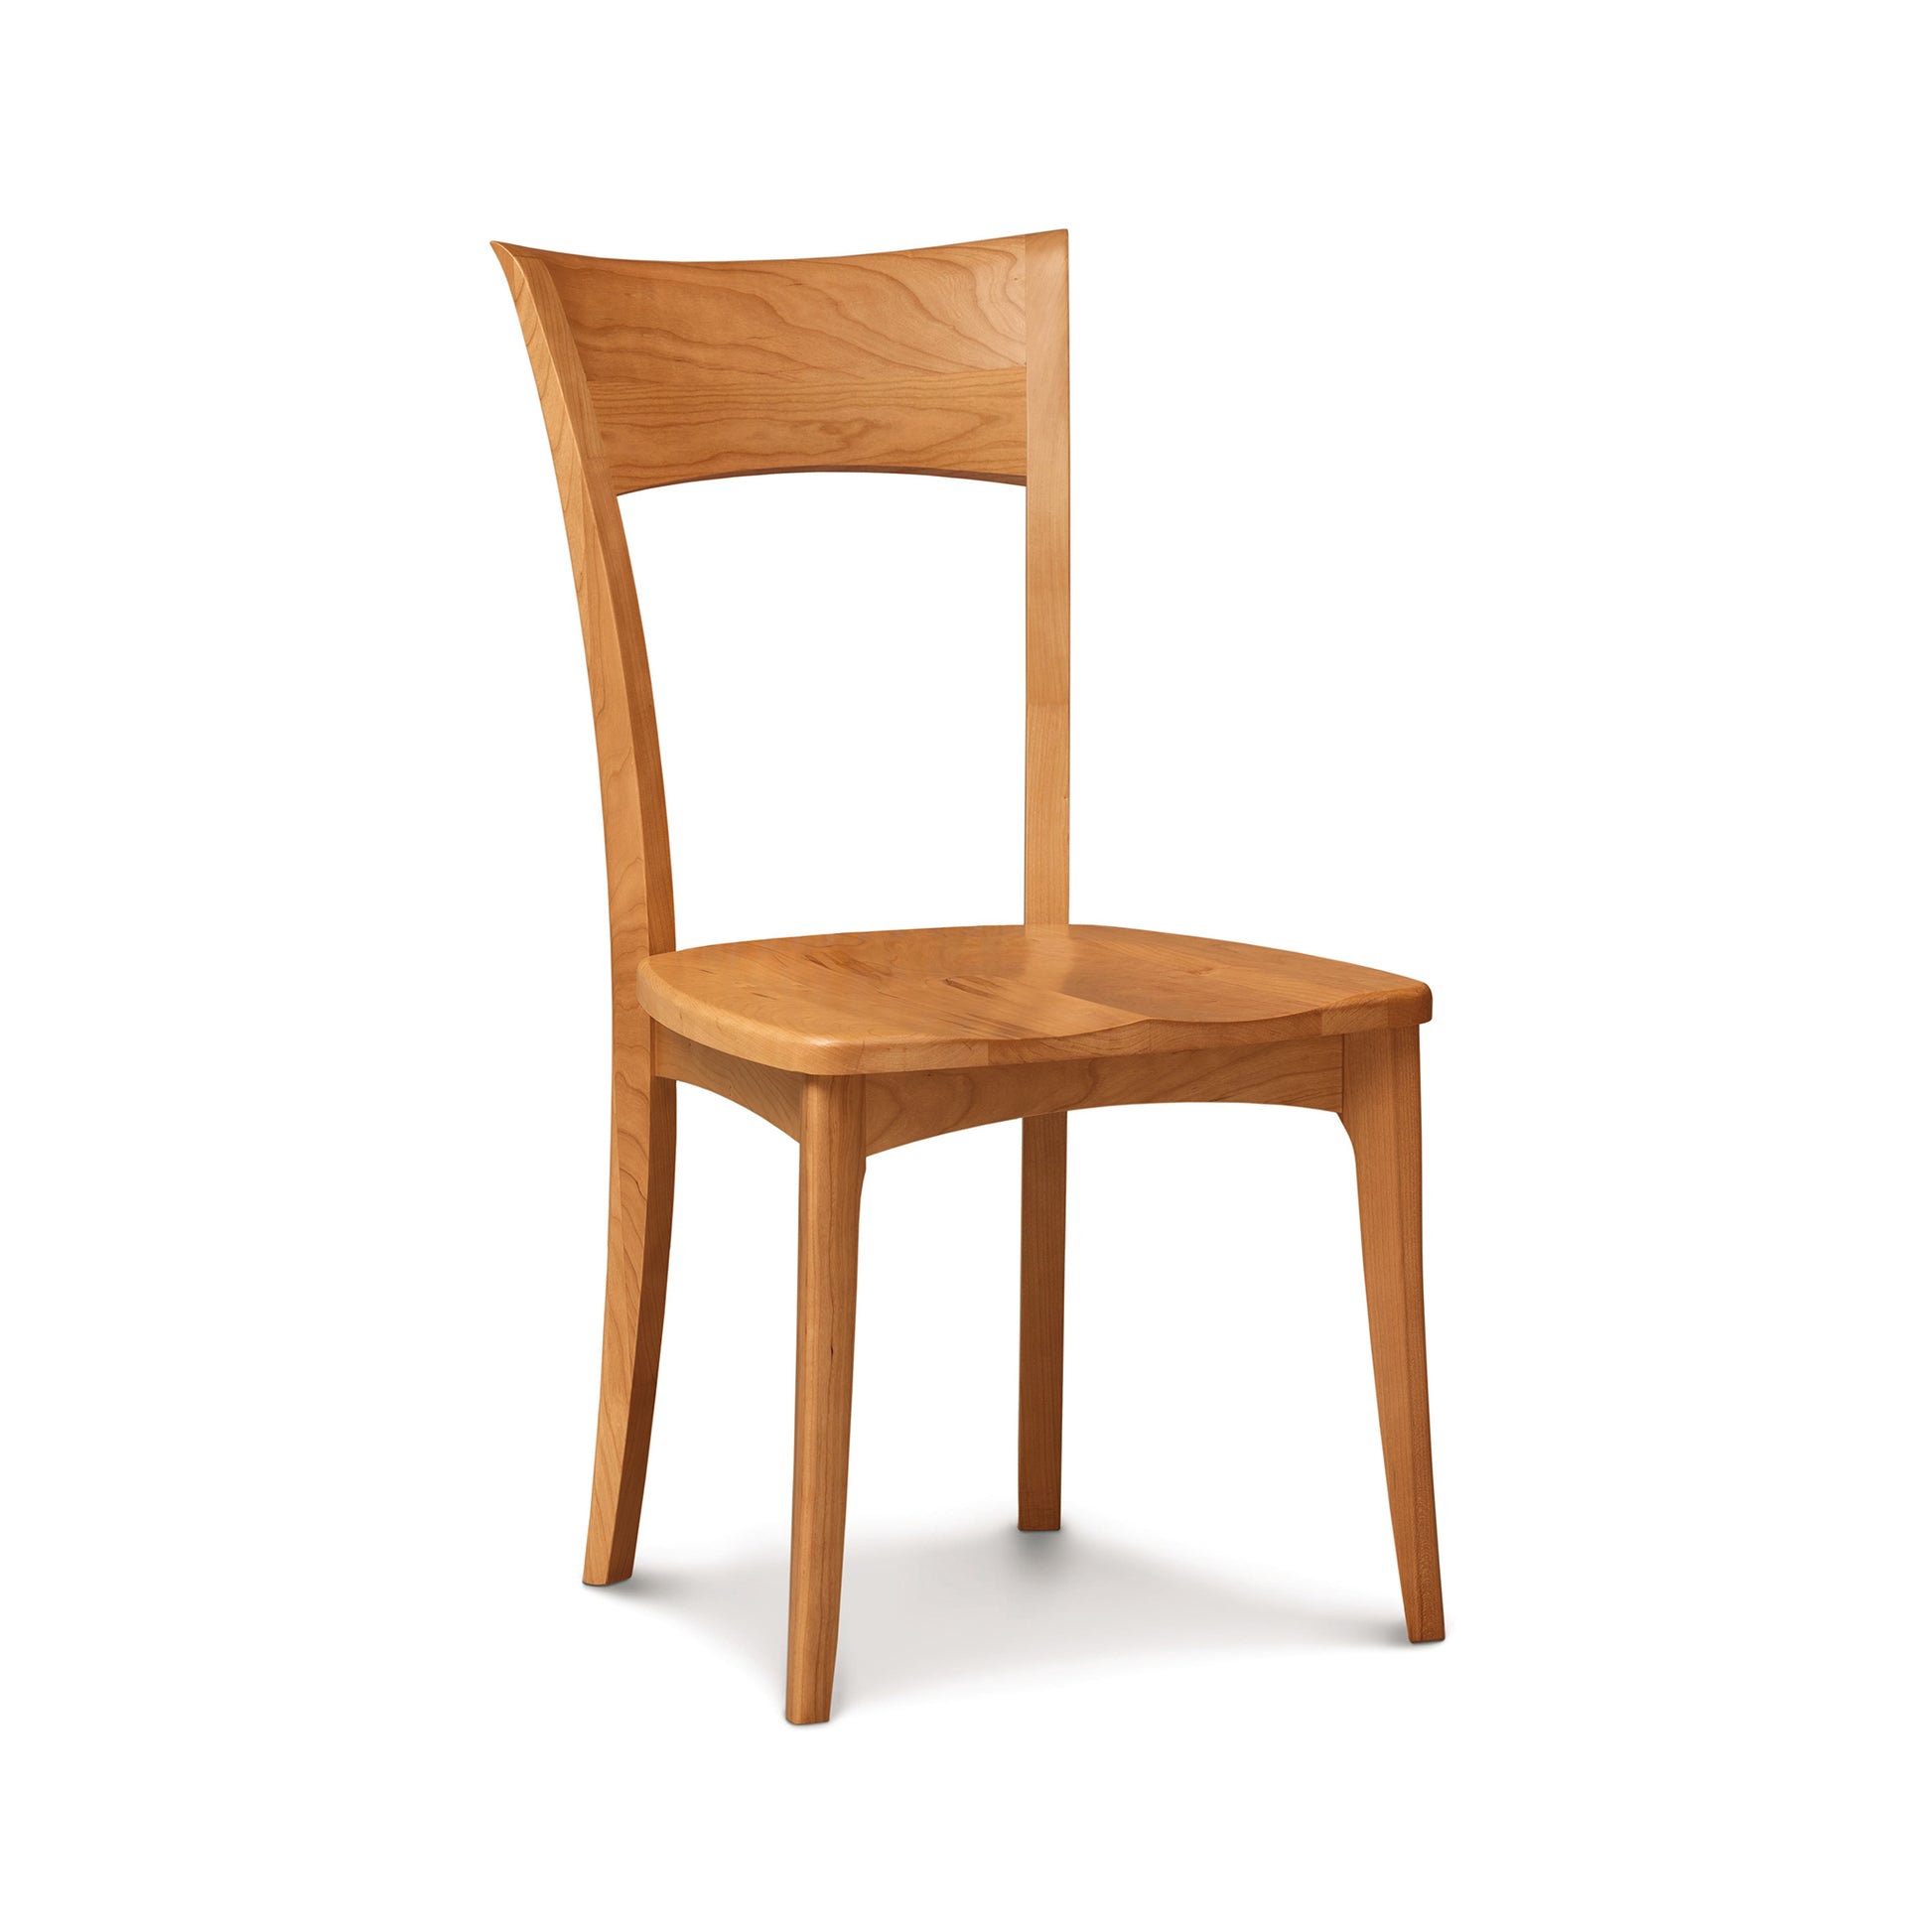 A Copeland Furniture Ingrid Shaker Chair with Wood Seat, with a curved backrest and four legs, isolated on a white background.